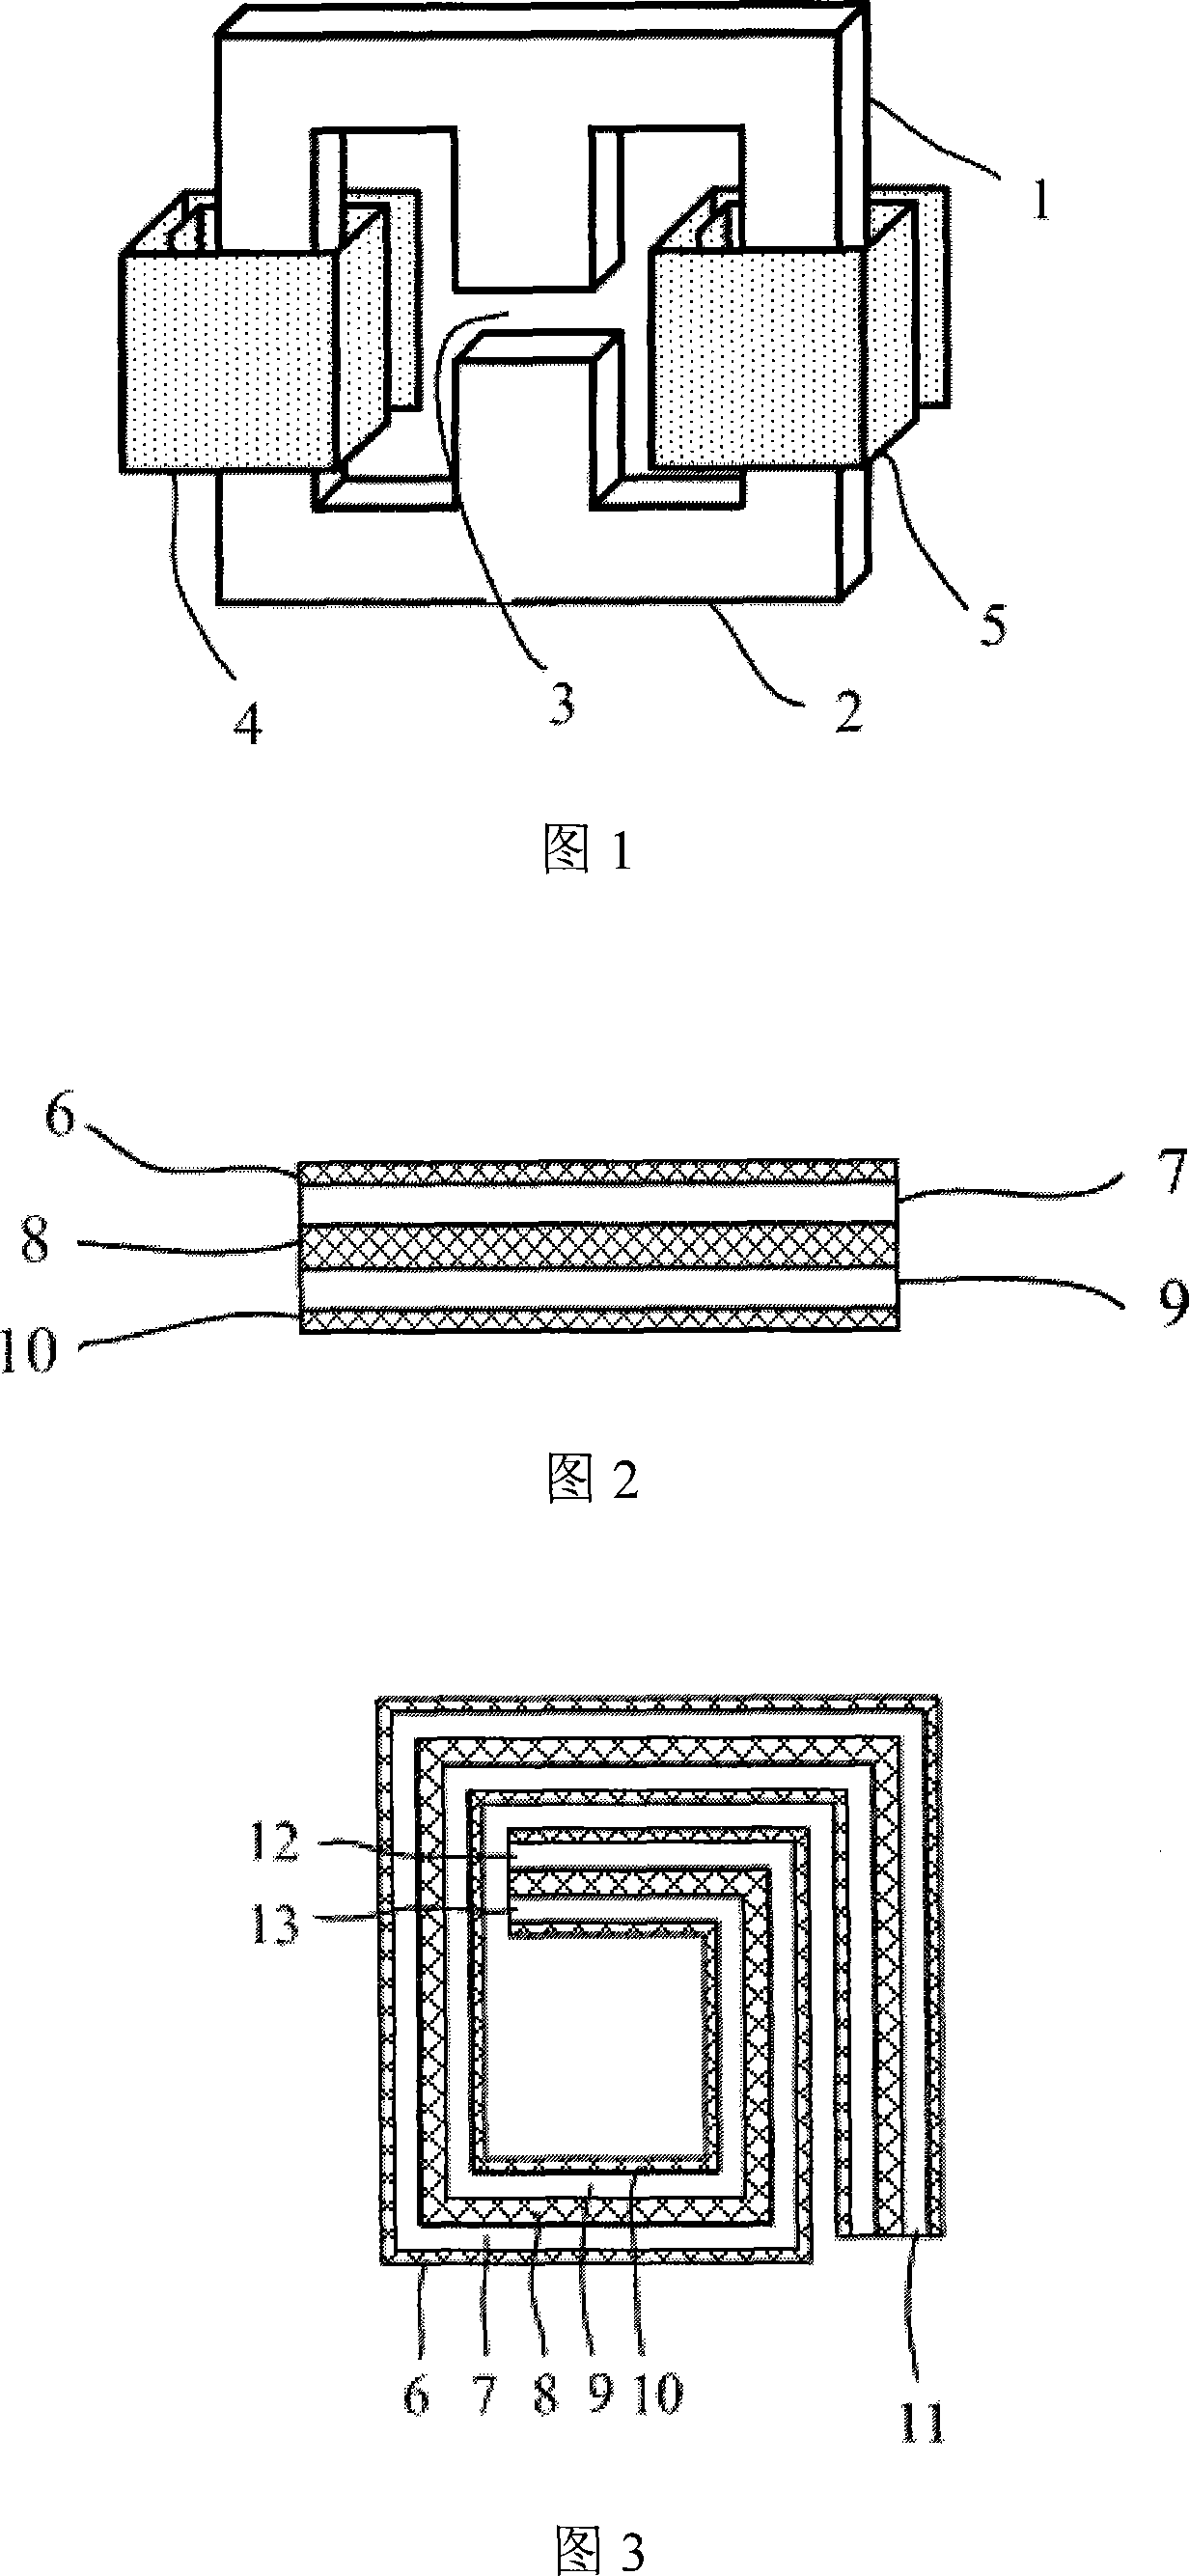 Inductance capacitance integrated structure implemented by flexible circuit board in EMI filter